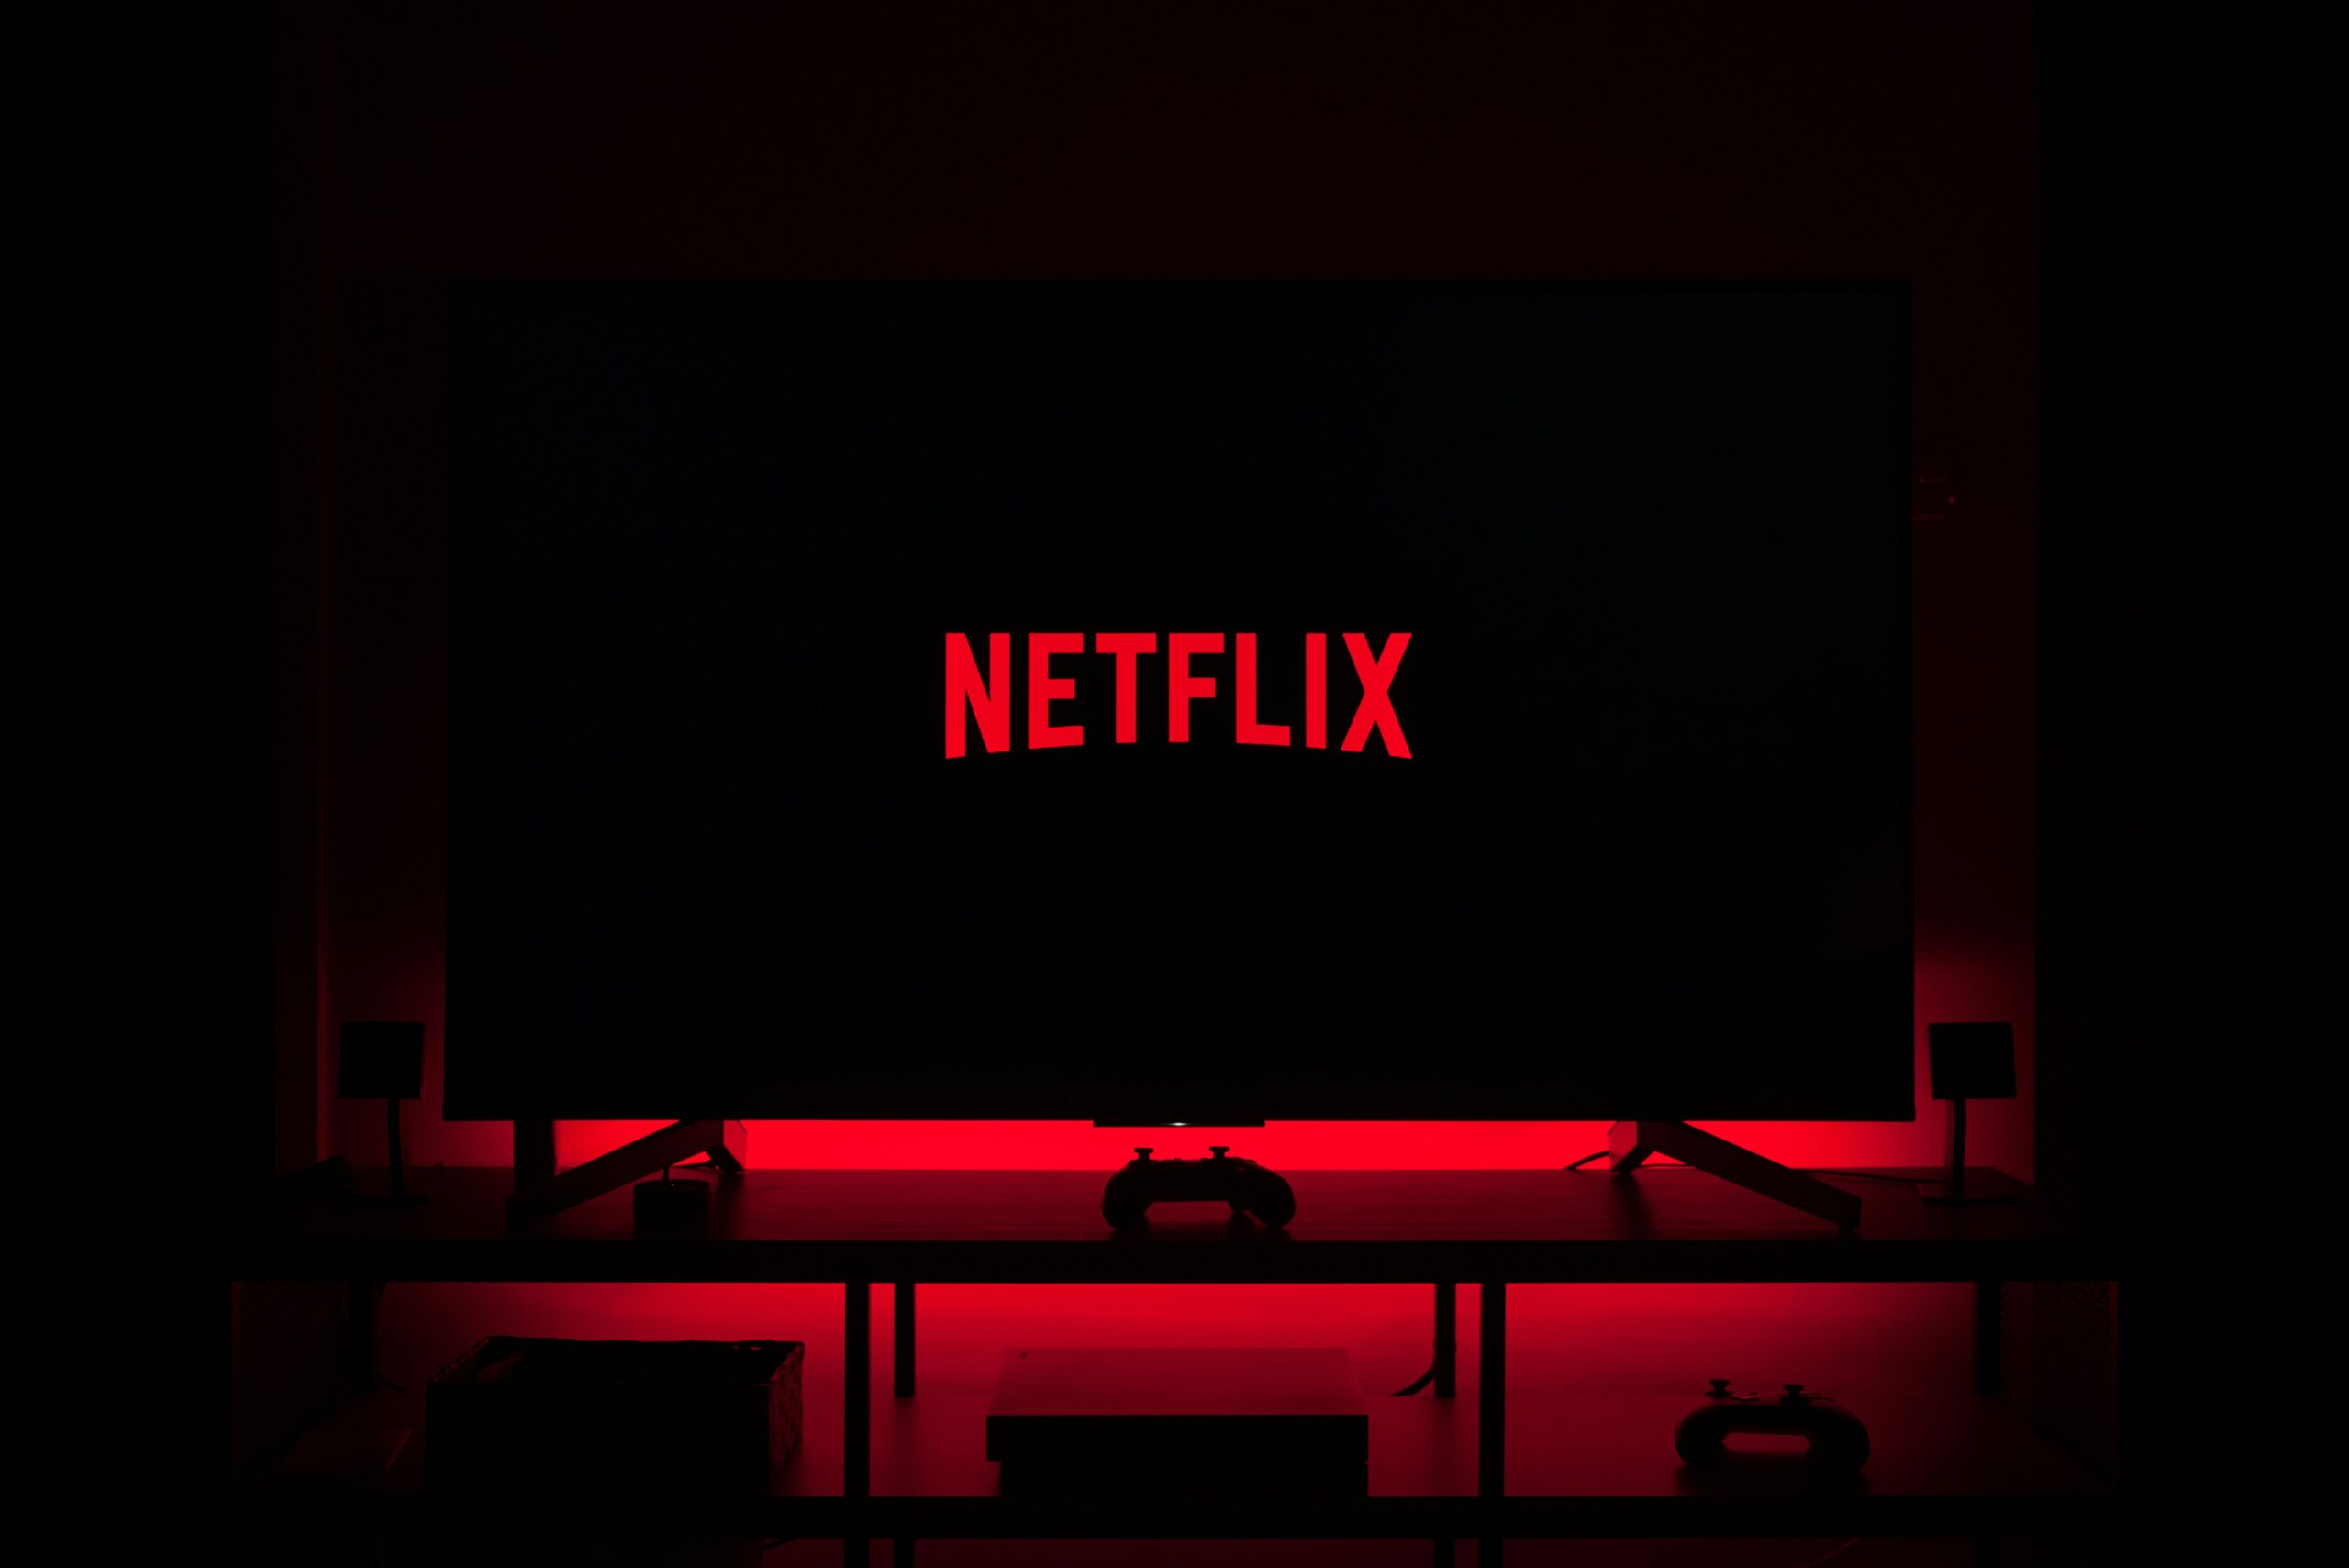 My top 4 Netflix recommendations for Lazy weekend #BlogchatterAtoZ